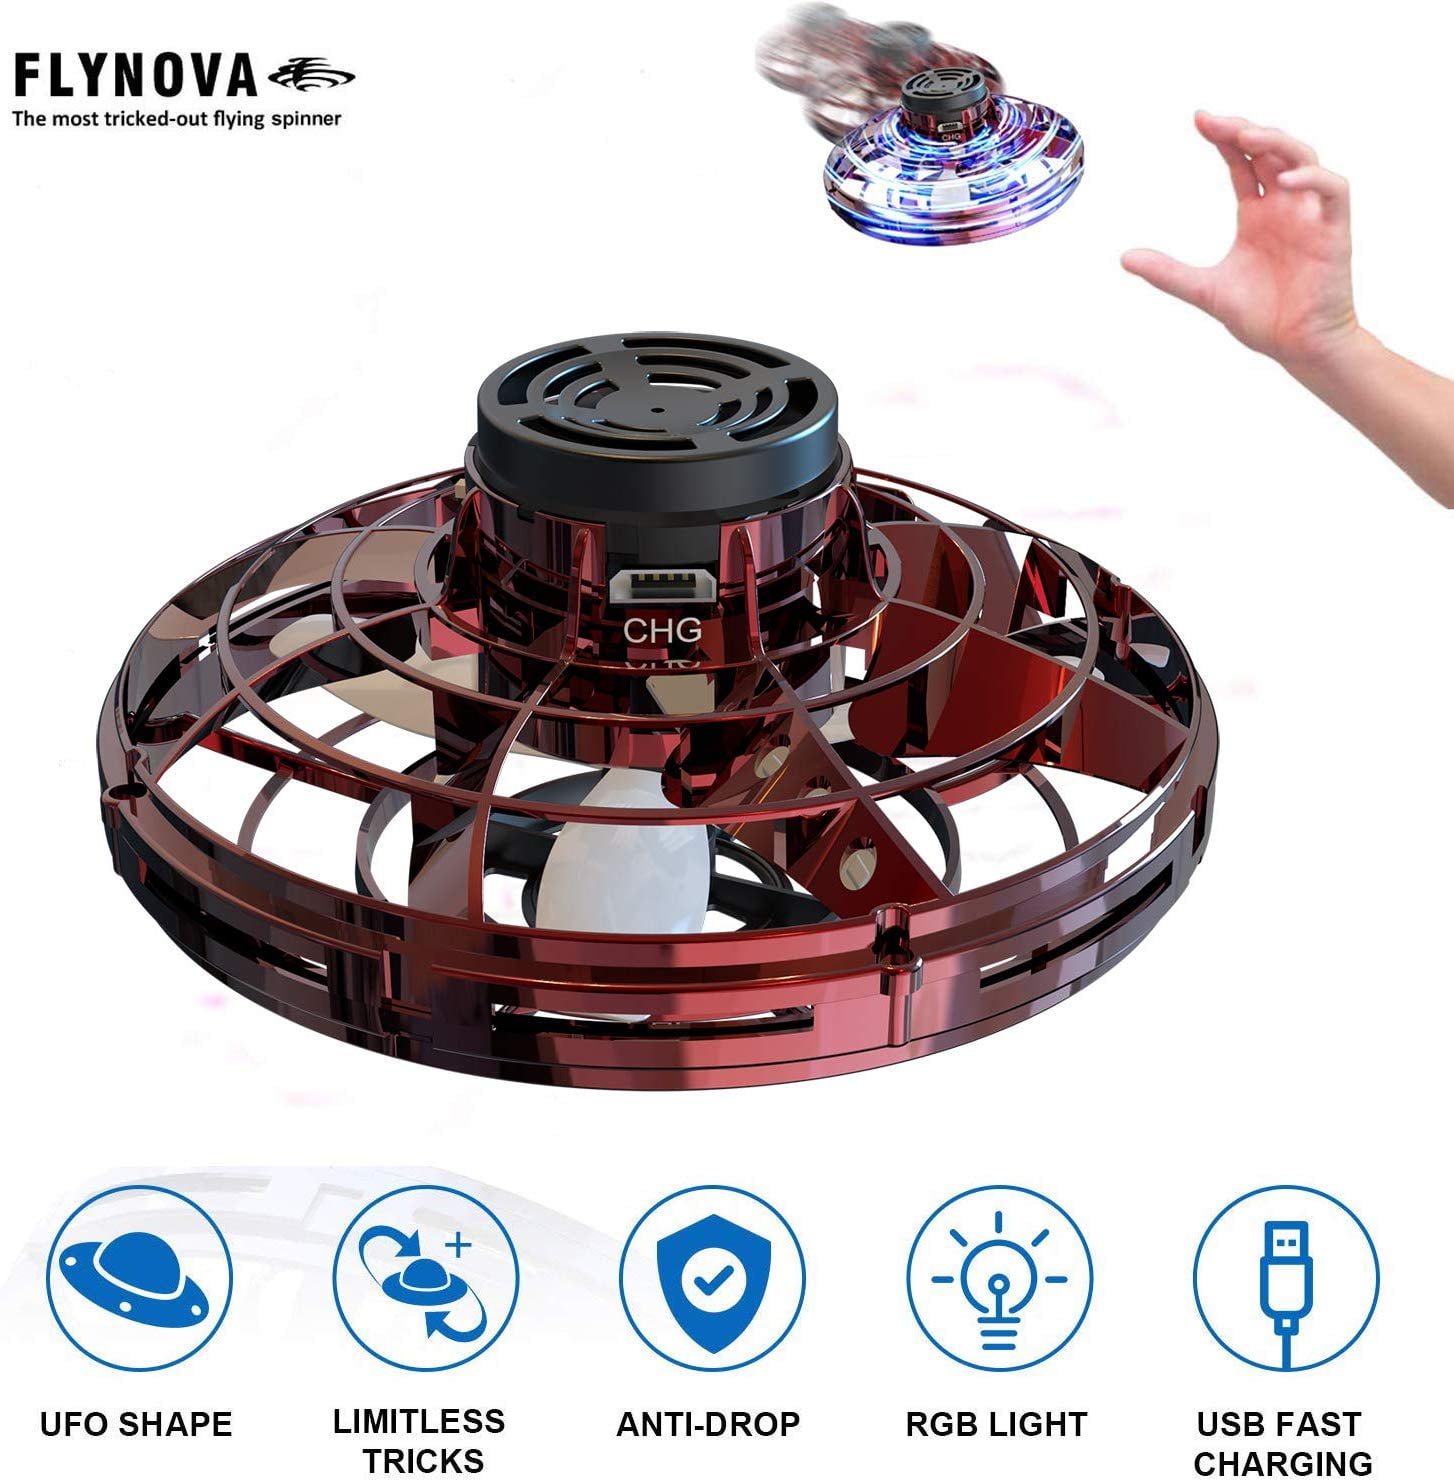 Details about   Flynova Pro Spinner Mini Drone Ball UFO Trick Flying Toy Hand Operated Xmas Gift 